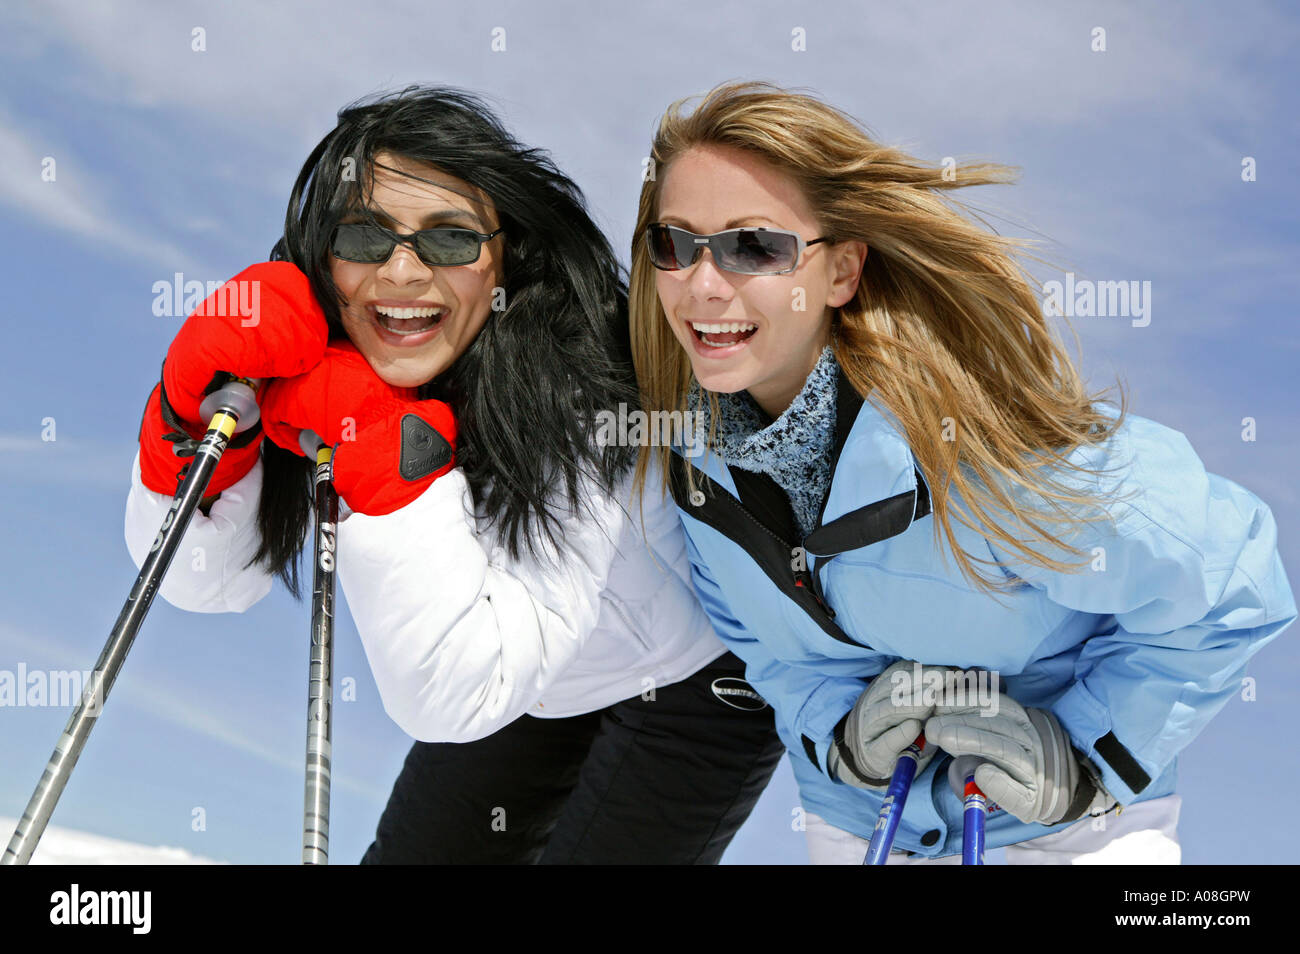 Page 3 - Freundinnen High Resolution Stock Photography and Images - Alamy